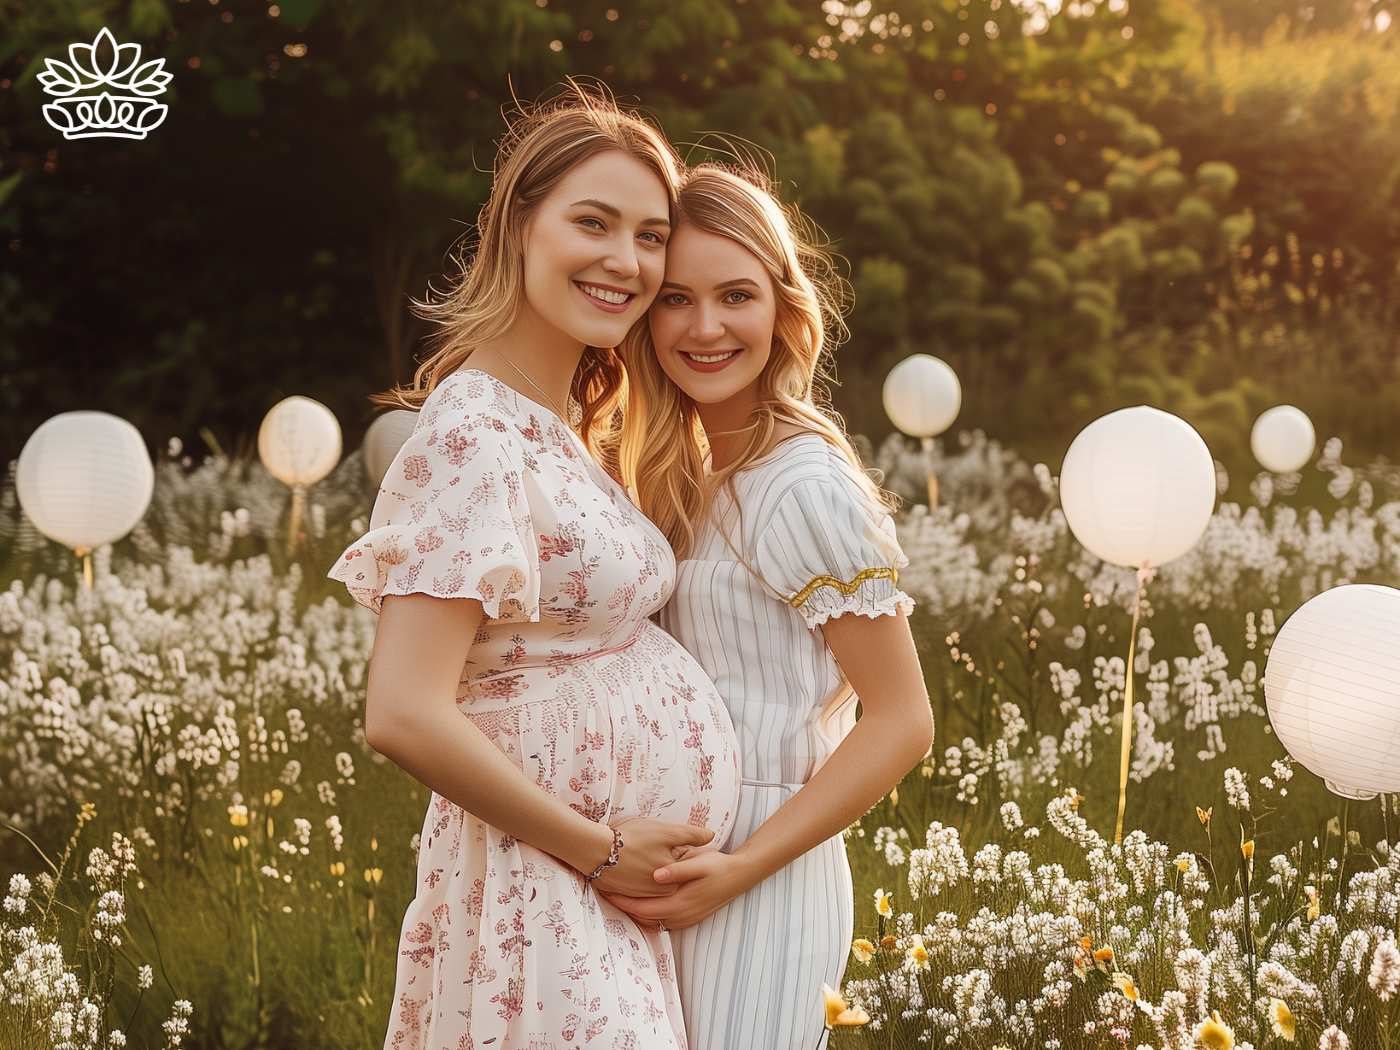 Two beaming pregnant women embracing in a tranquil field with wildflowers and glowing paper lanterns, celebrating motherhood with Fabulous Flowers and Gifts.